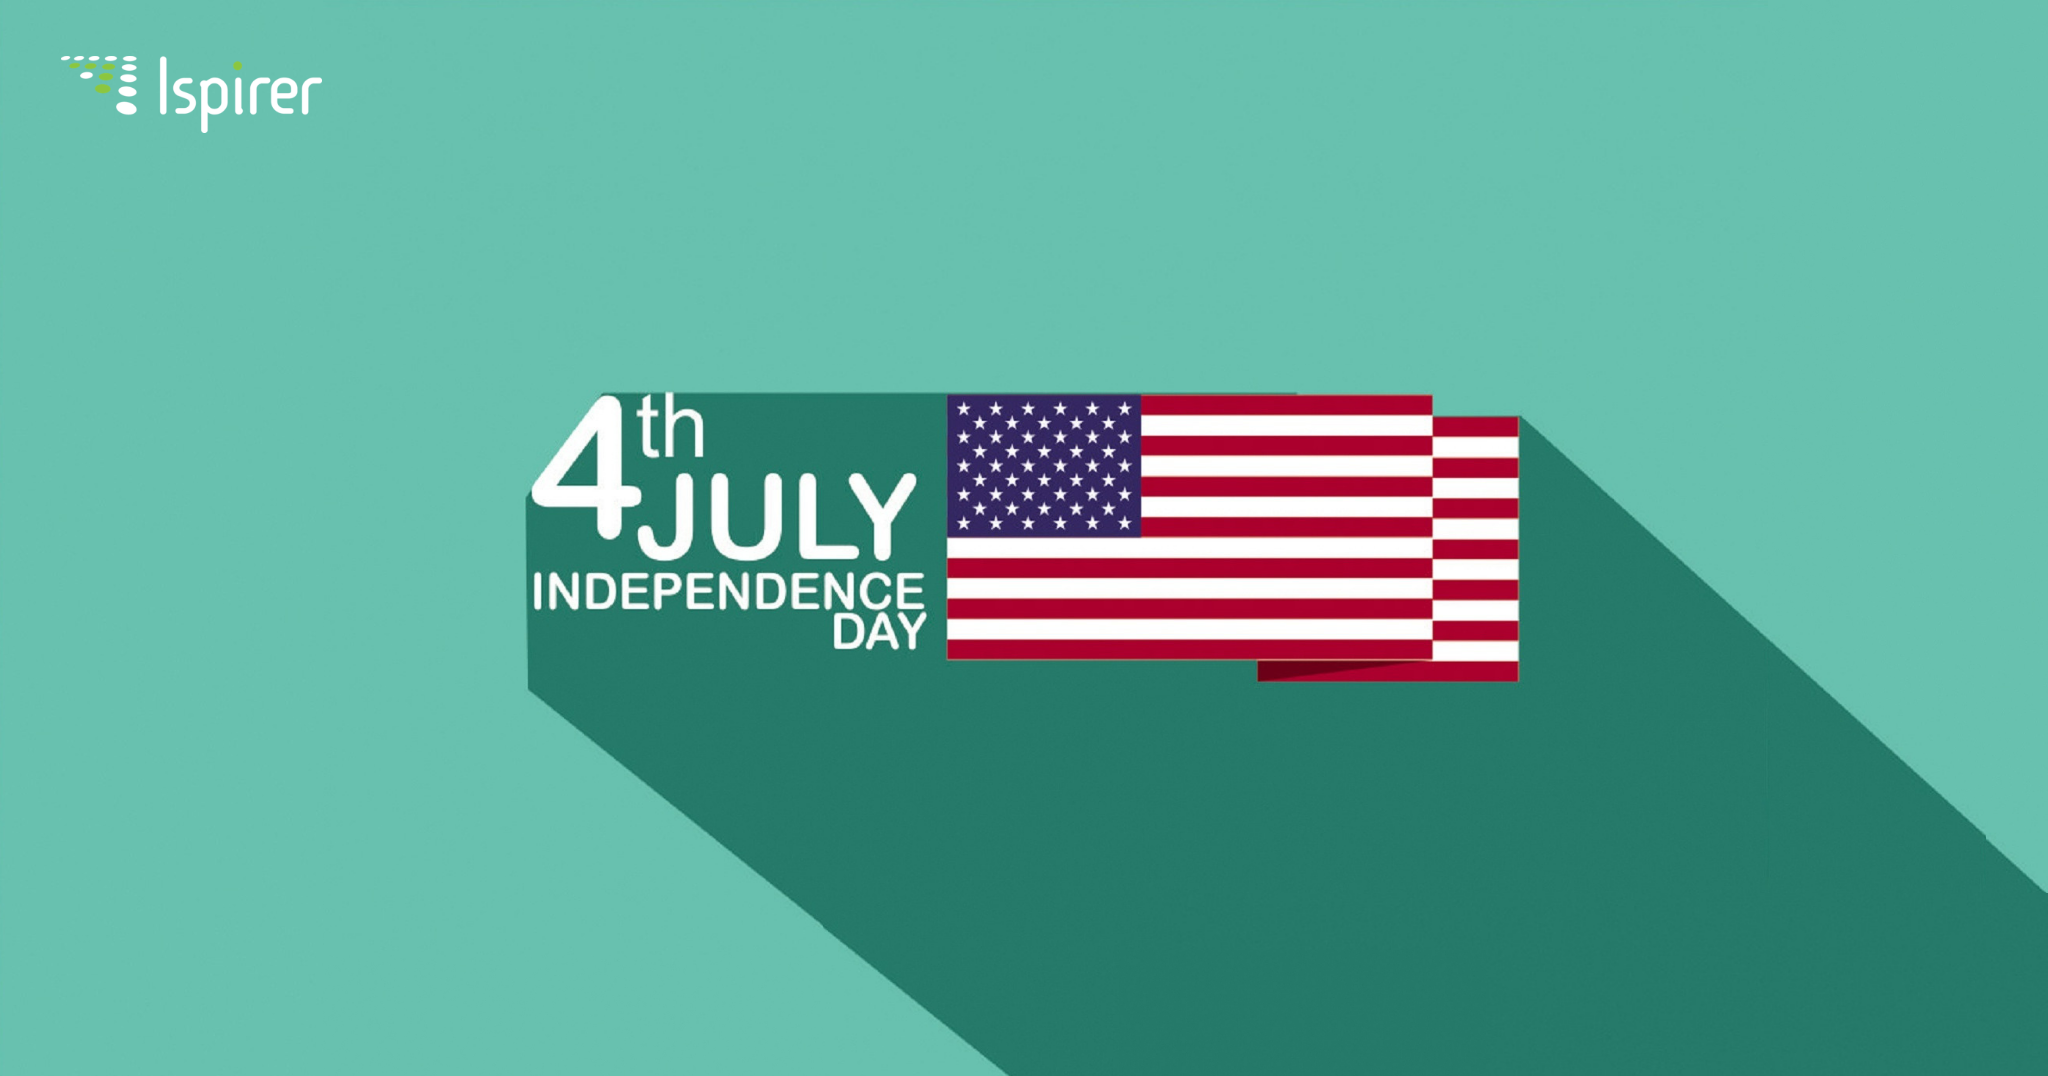 Happy Independence Day to America!